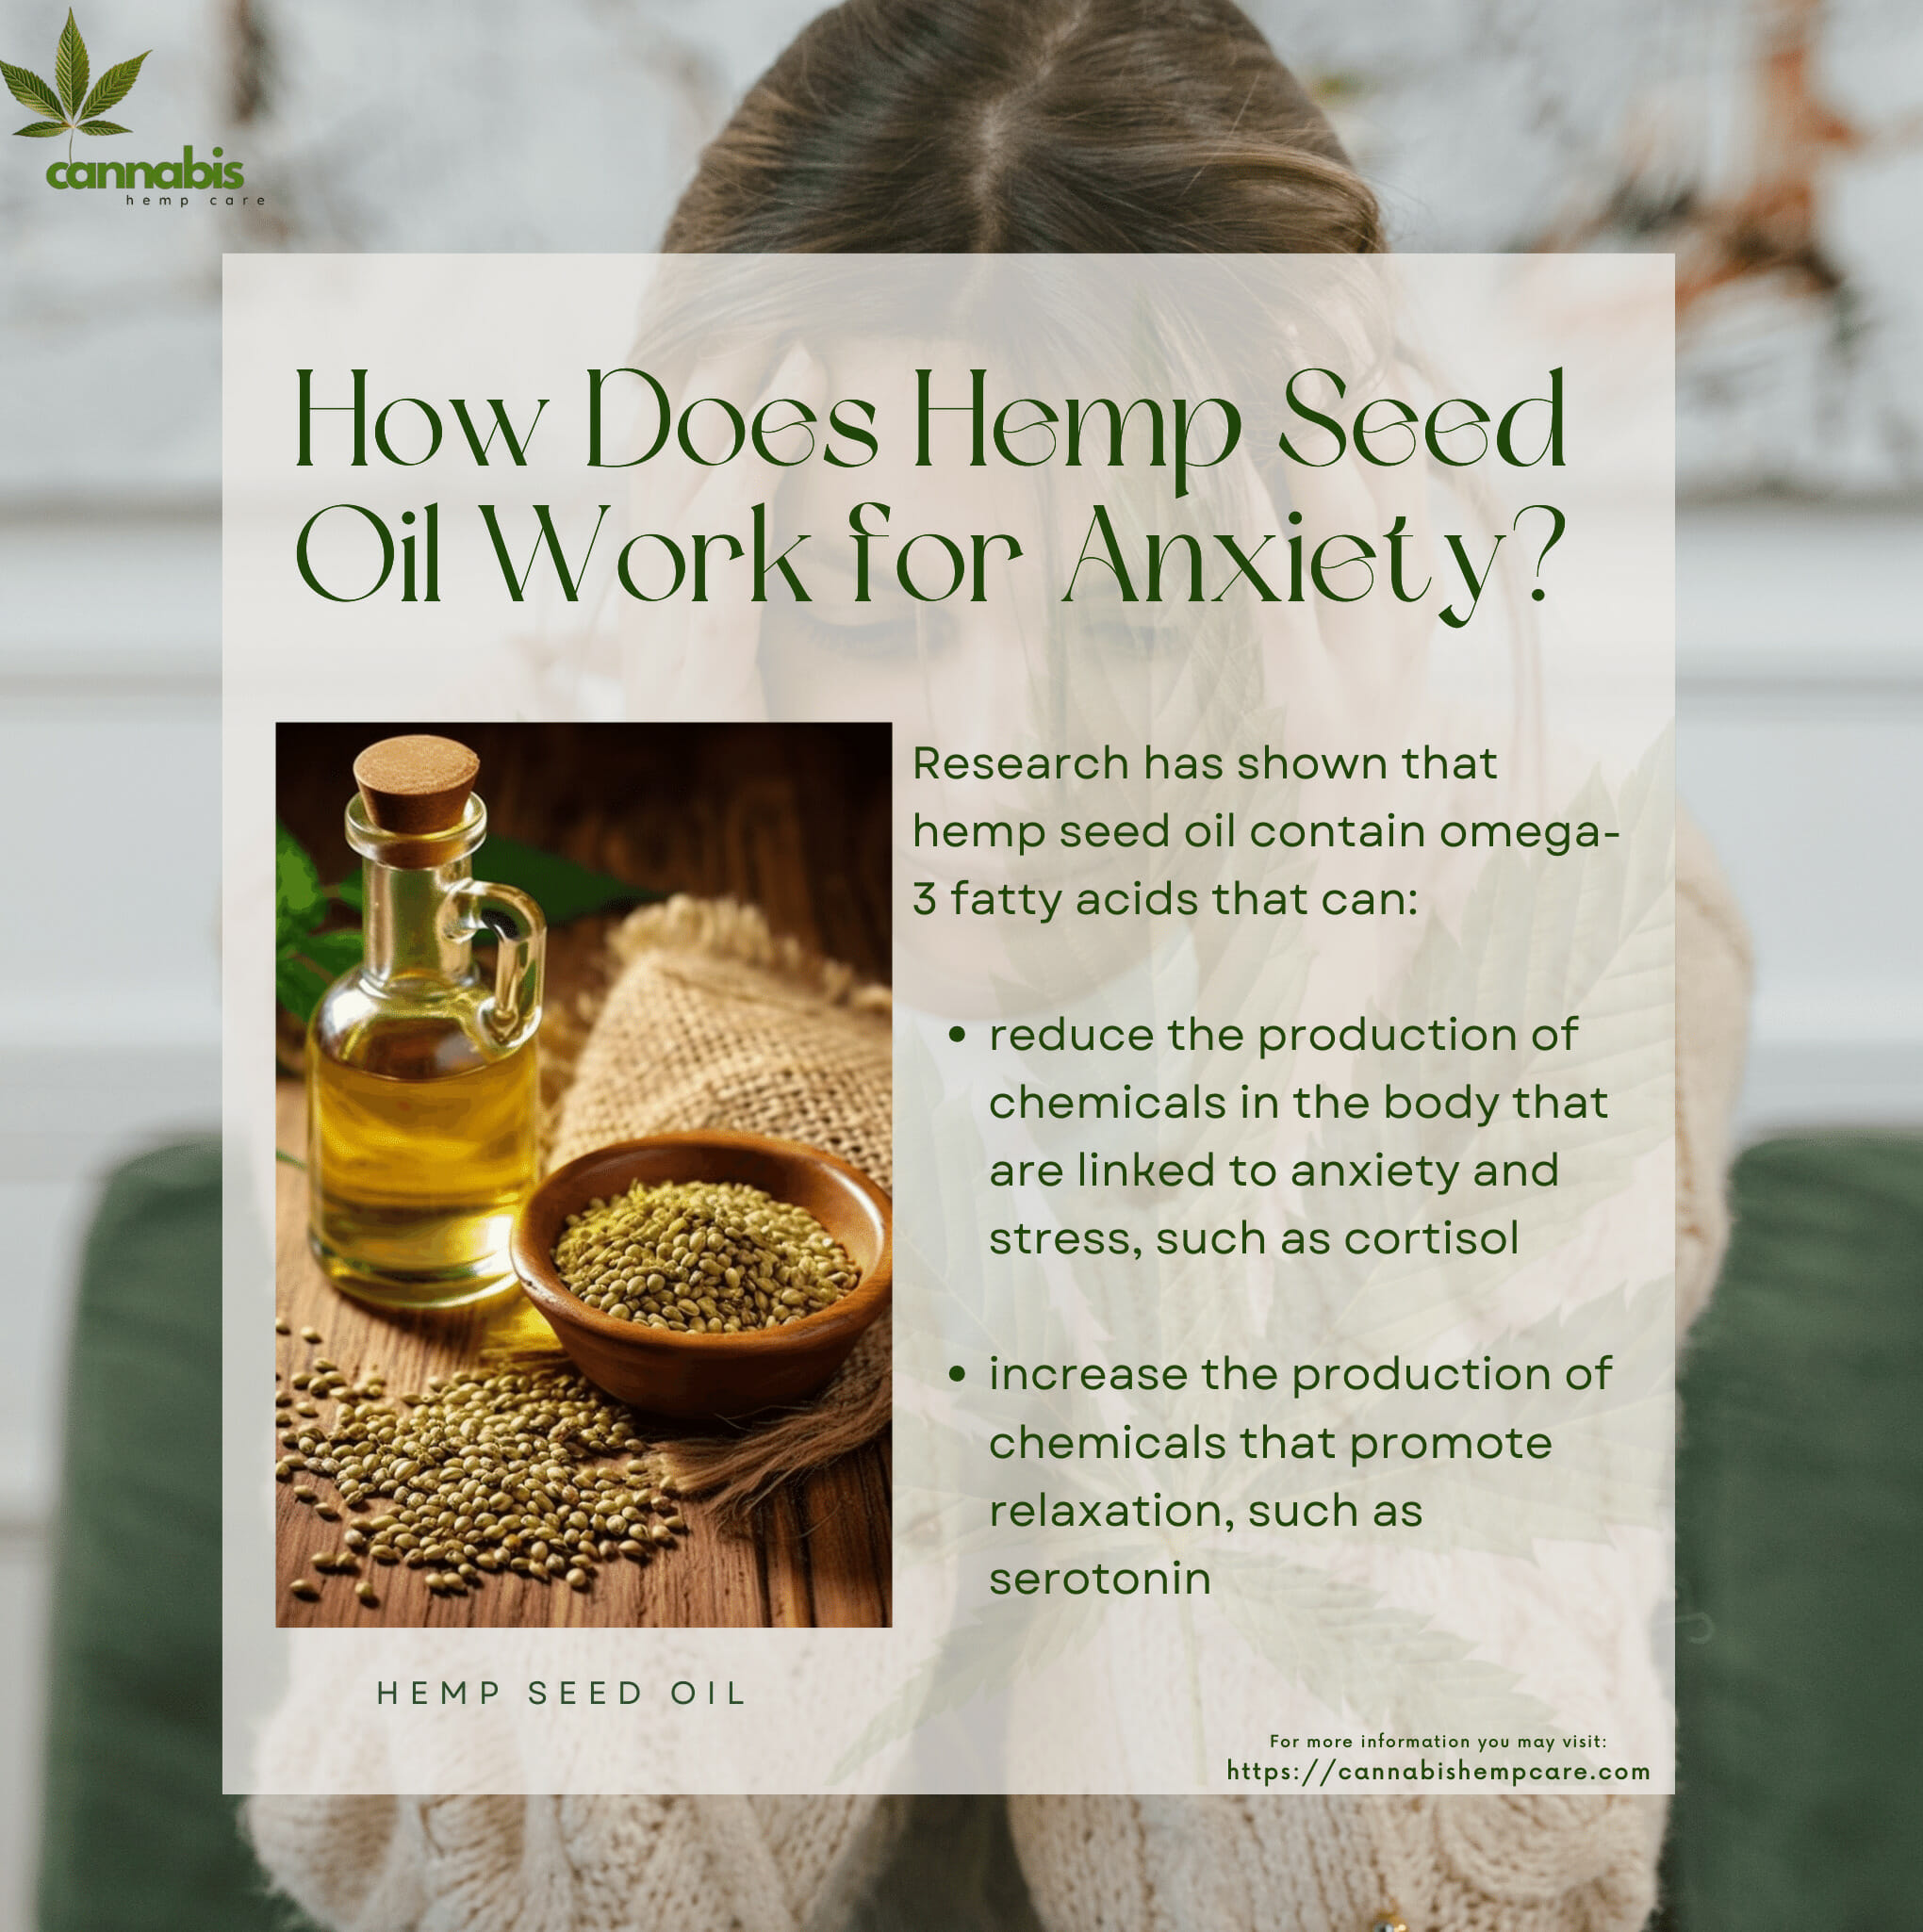 hemp seed oil contain omega-3 fatty acids that helps the person with anxiety